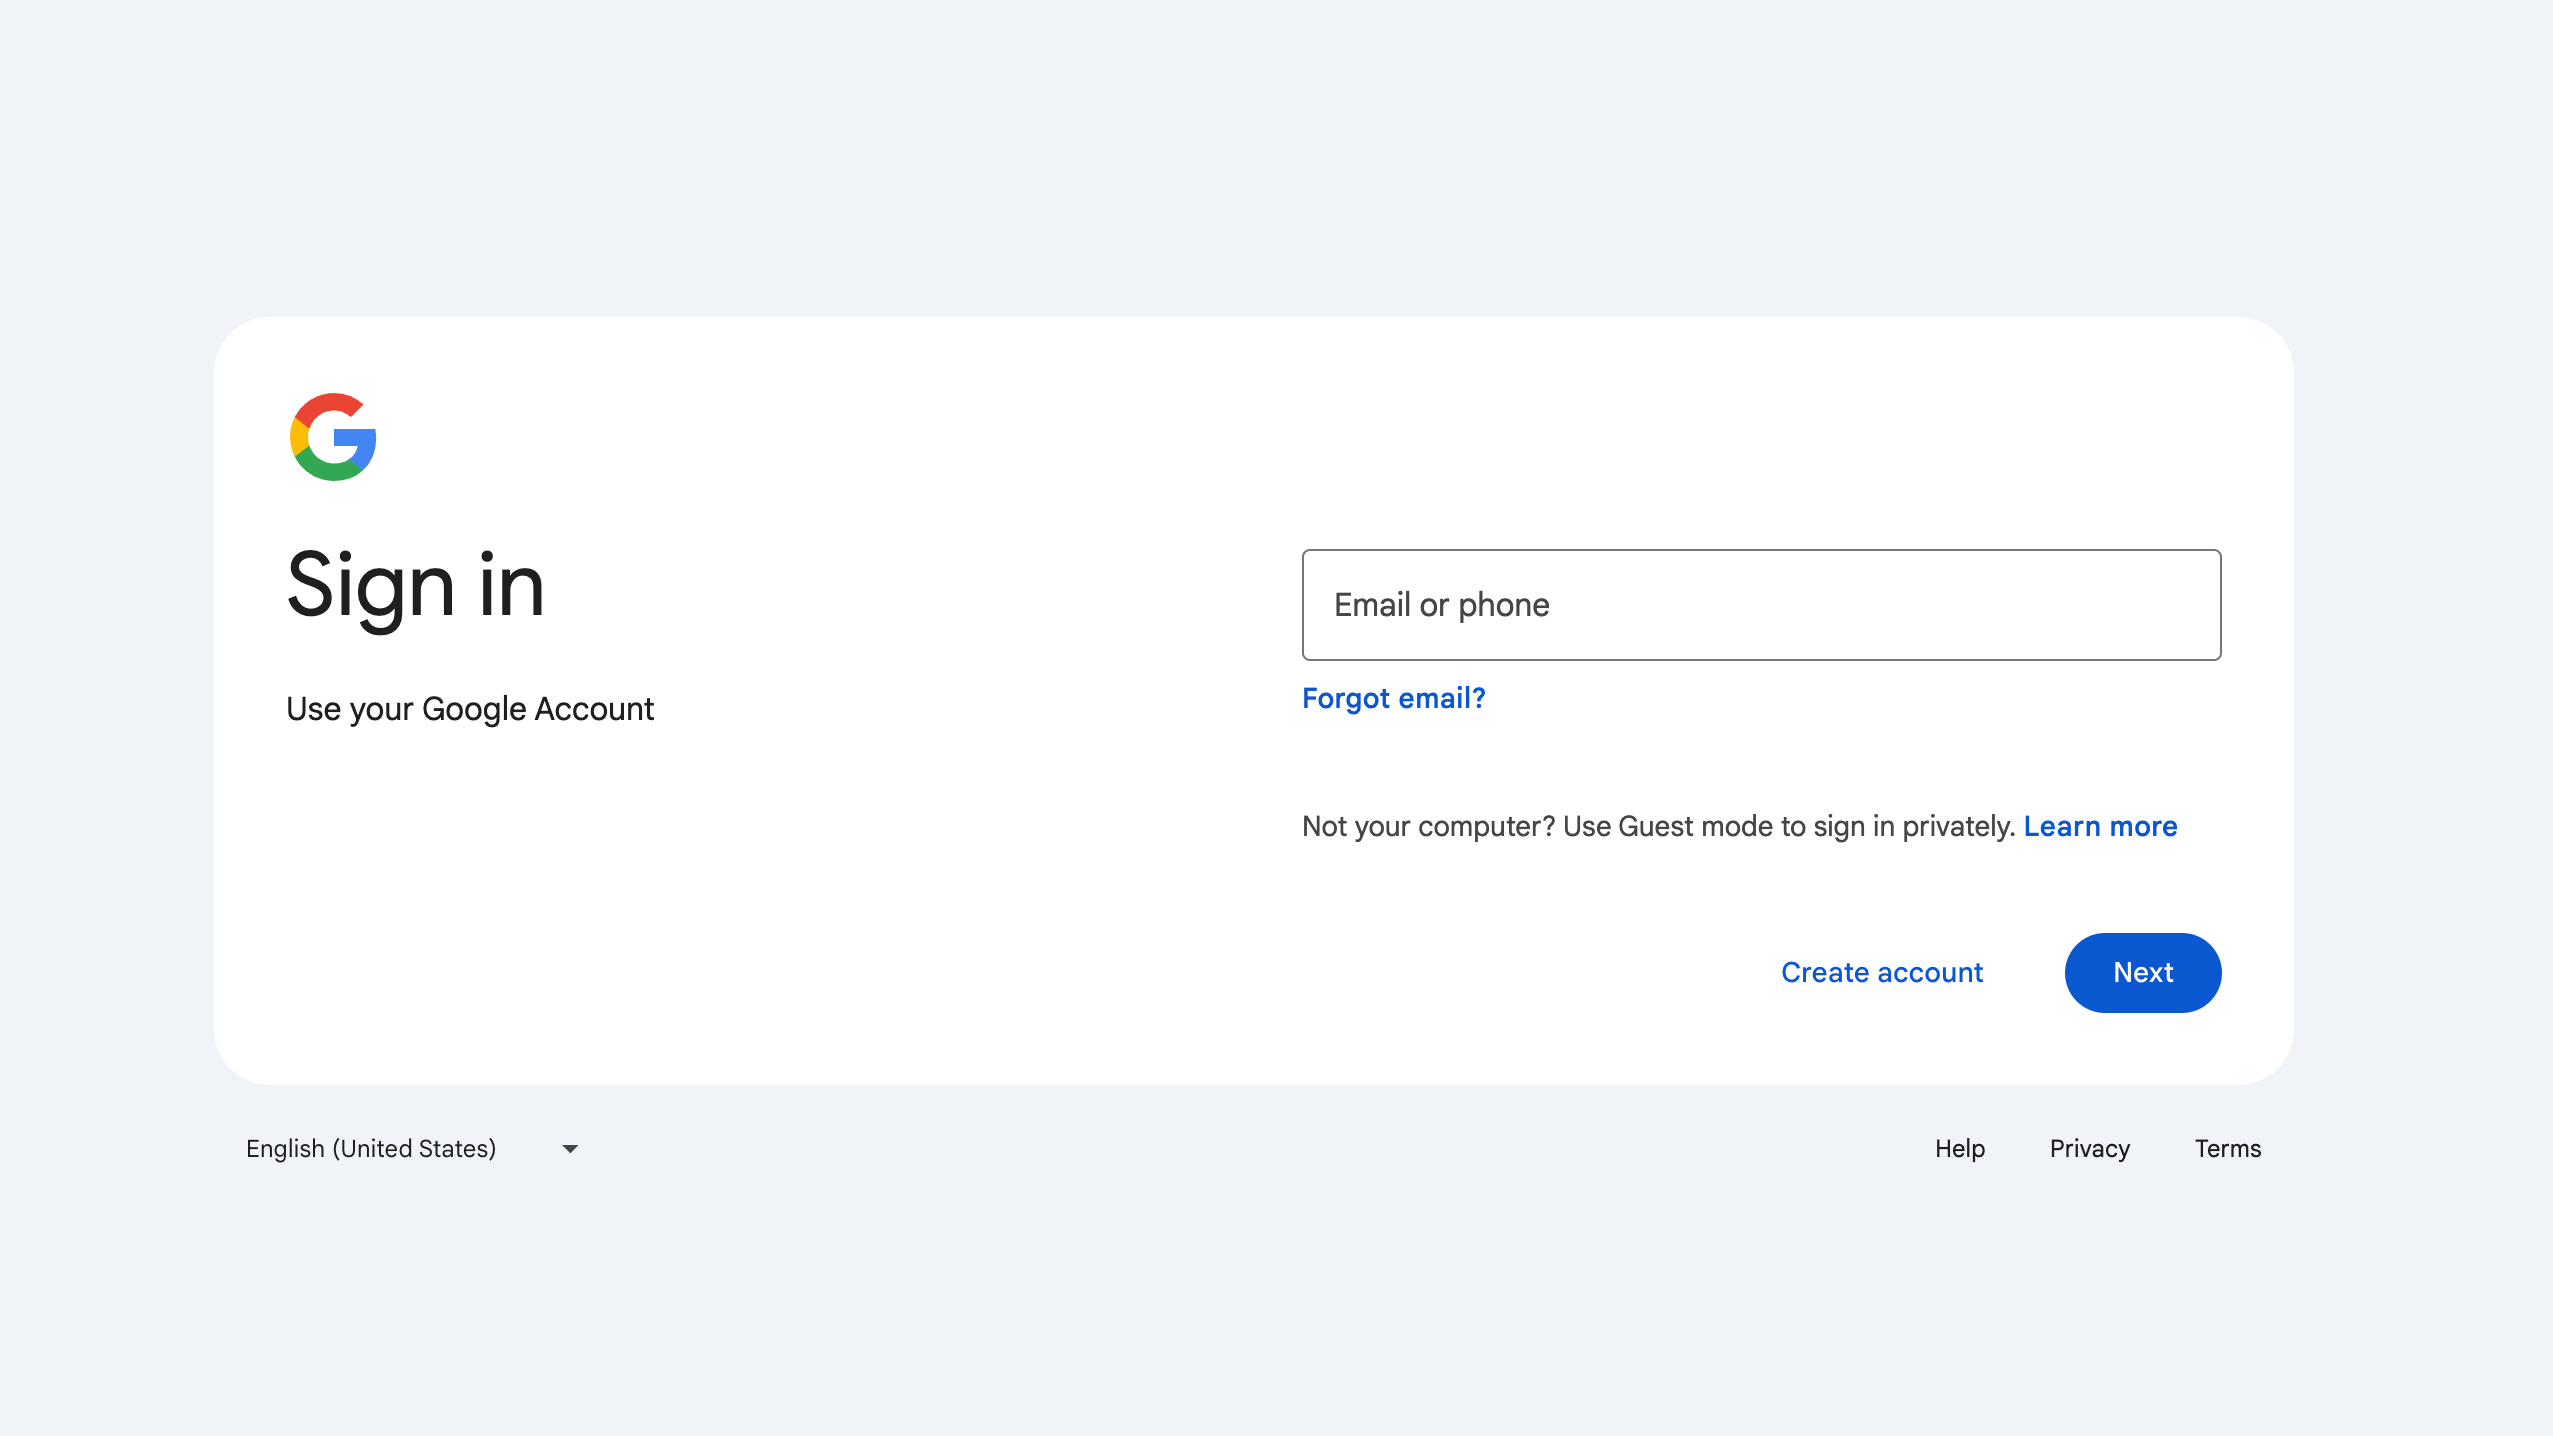 The updated design of the new Google sign-in page.